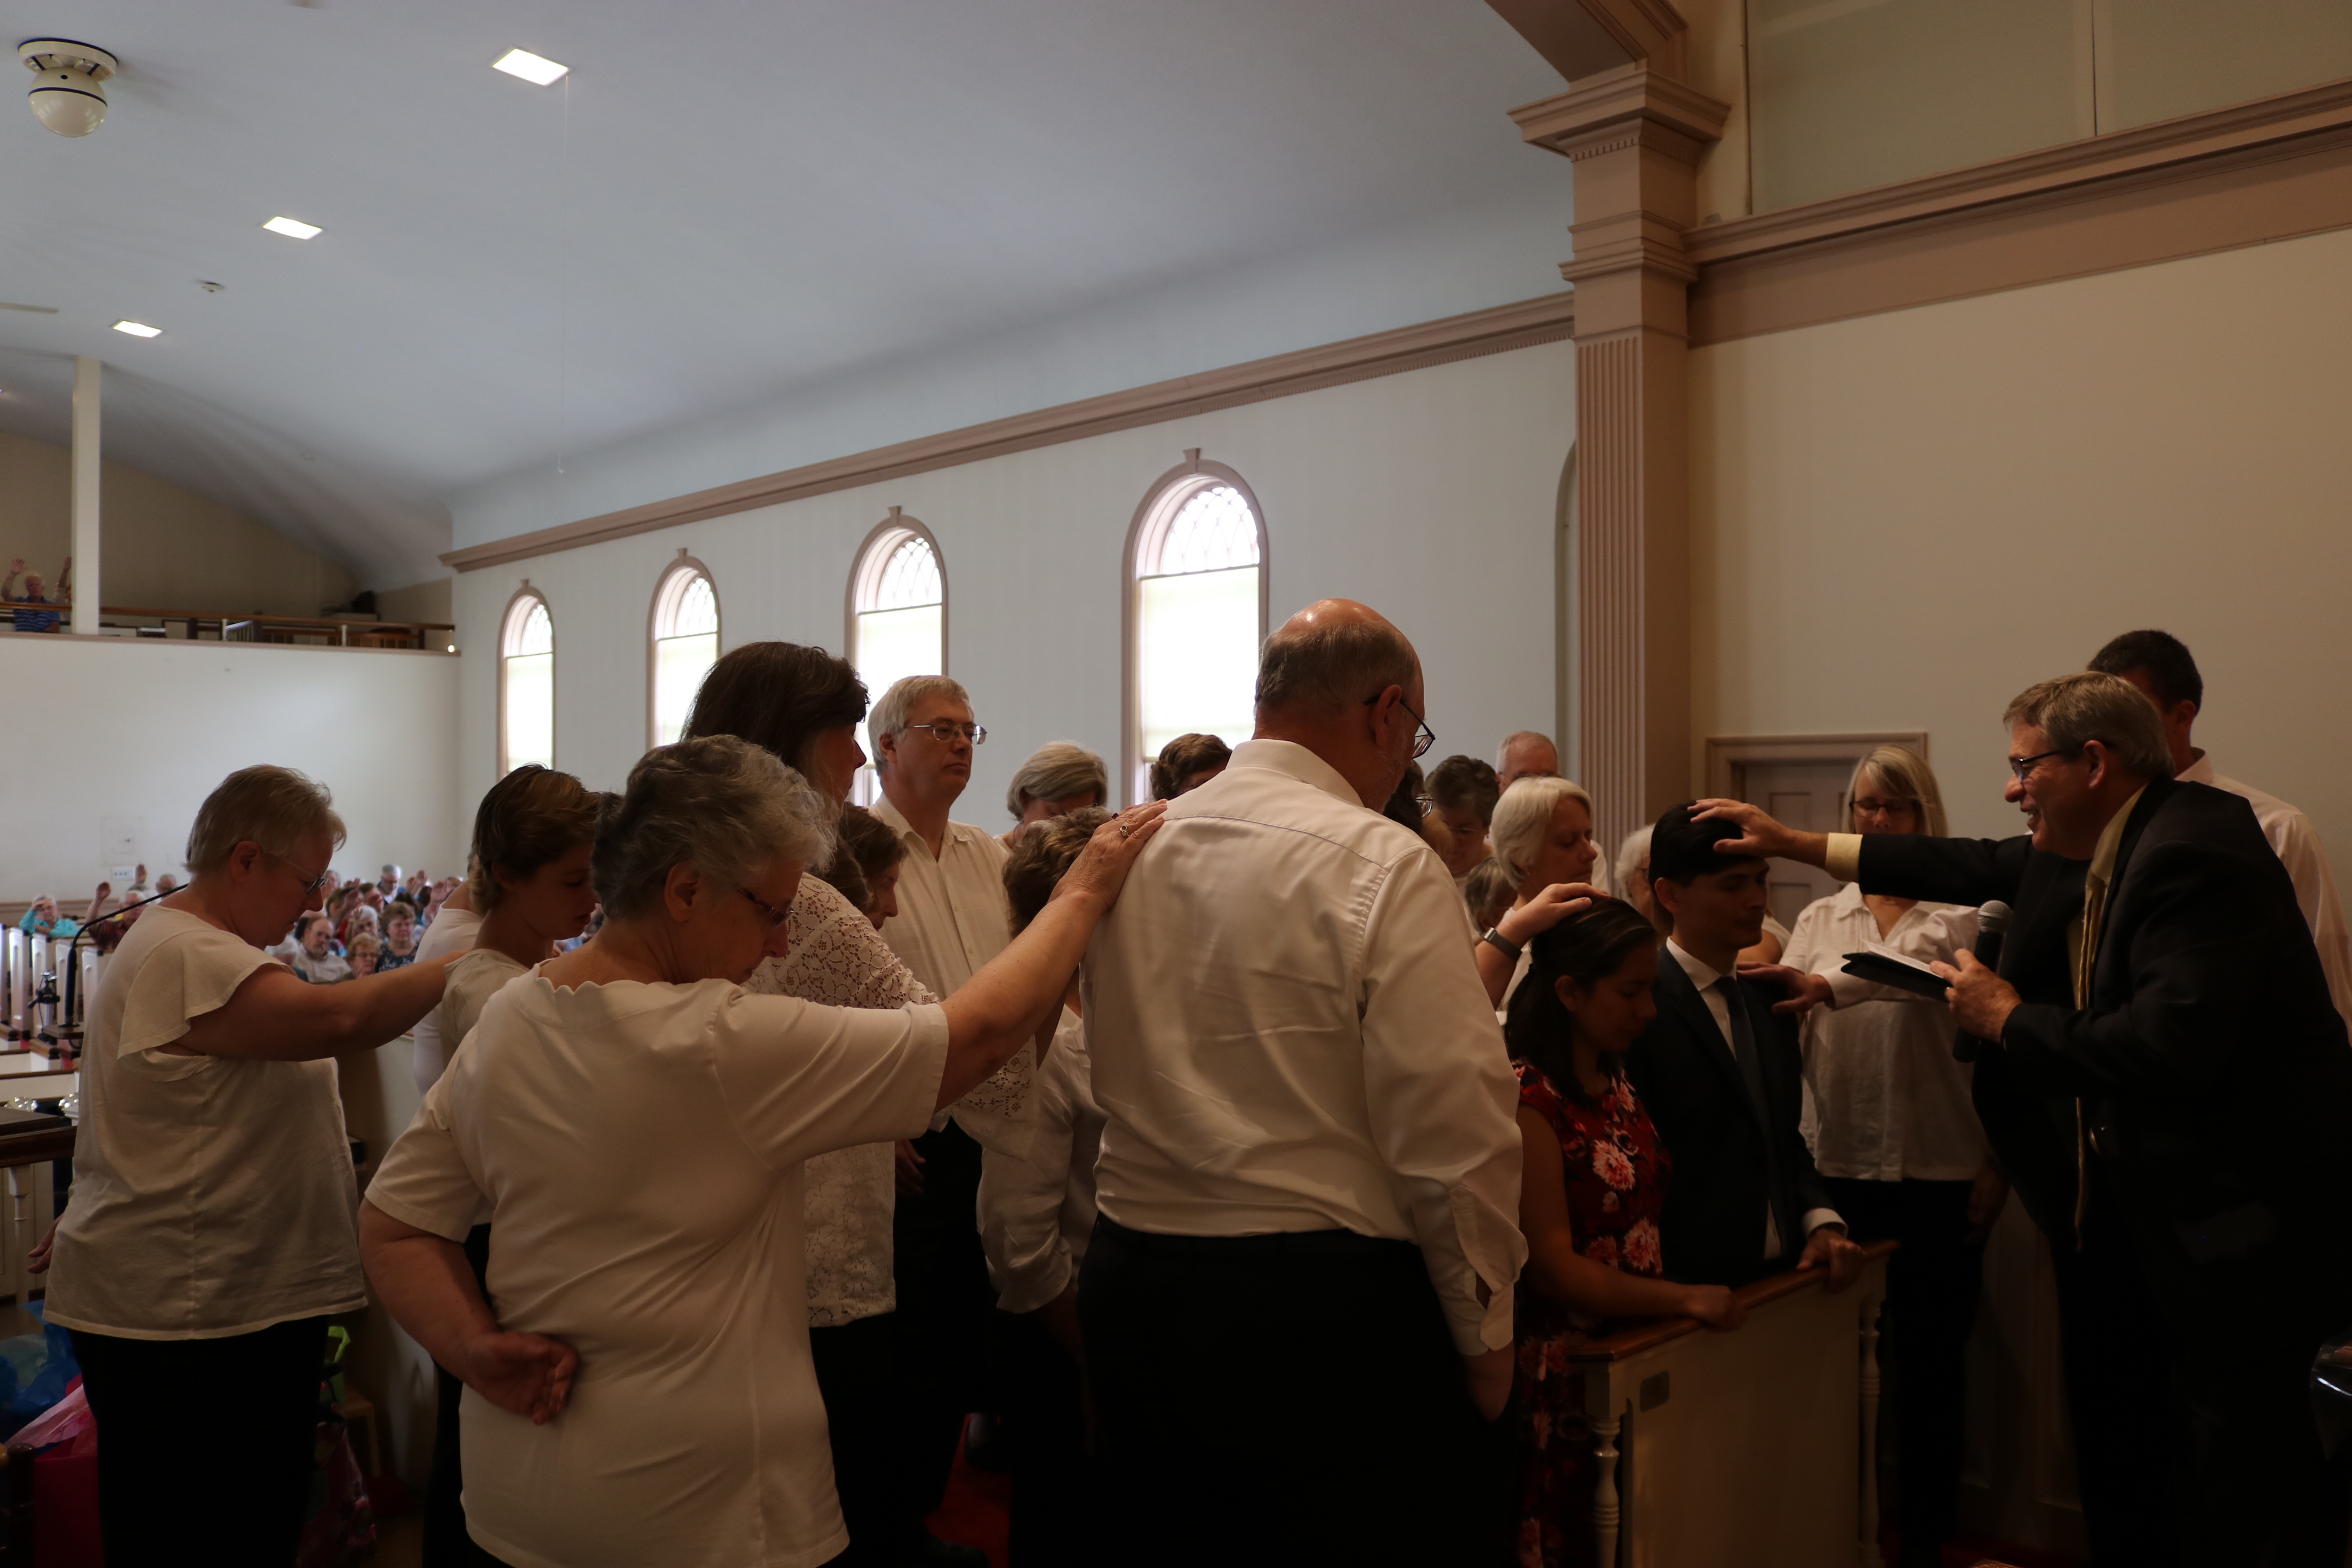 Farewell with a congregational blessing.